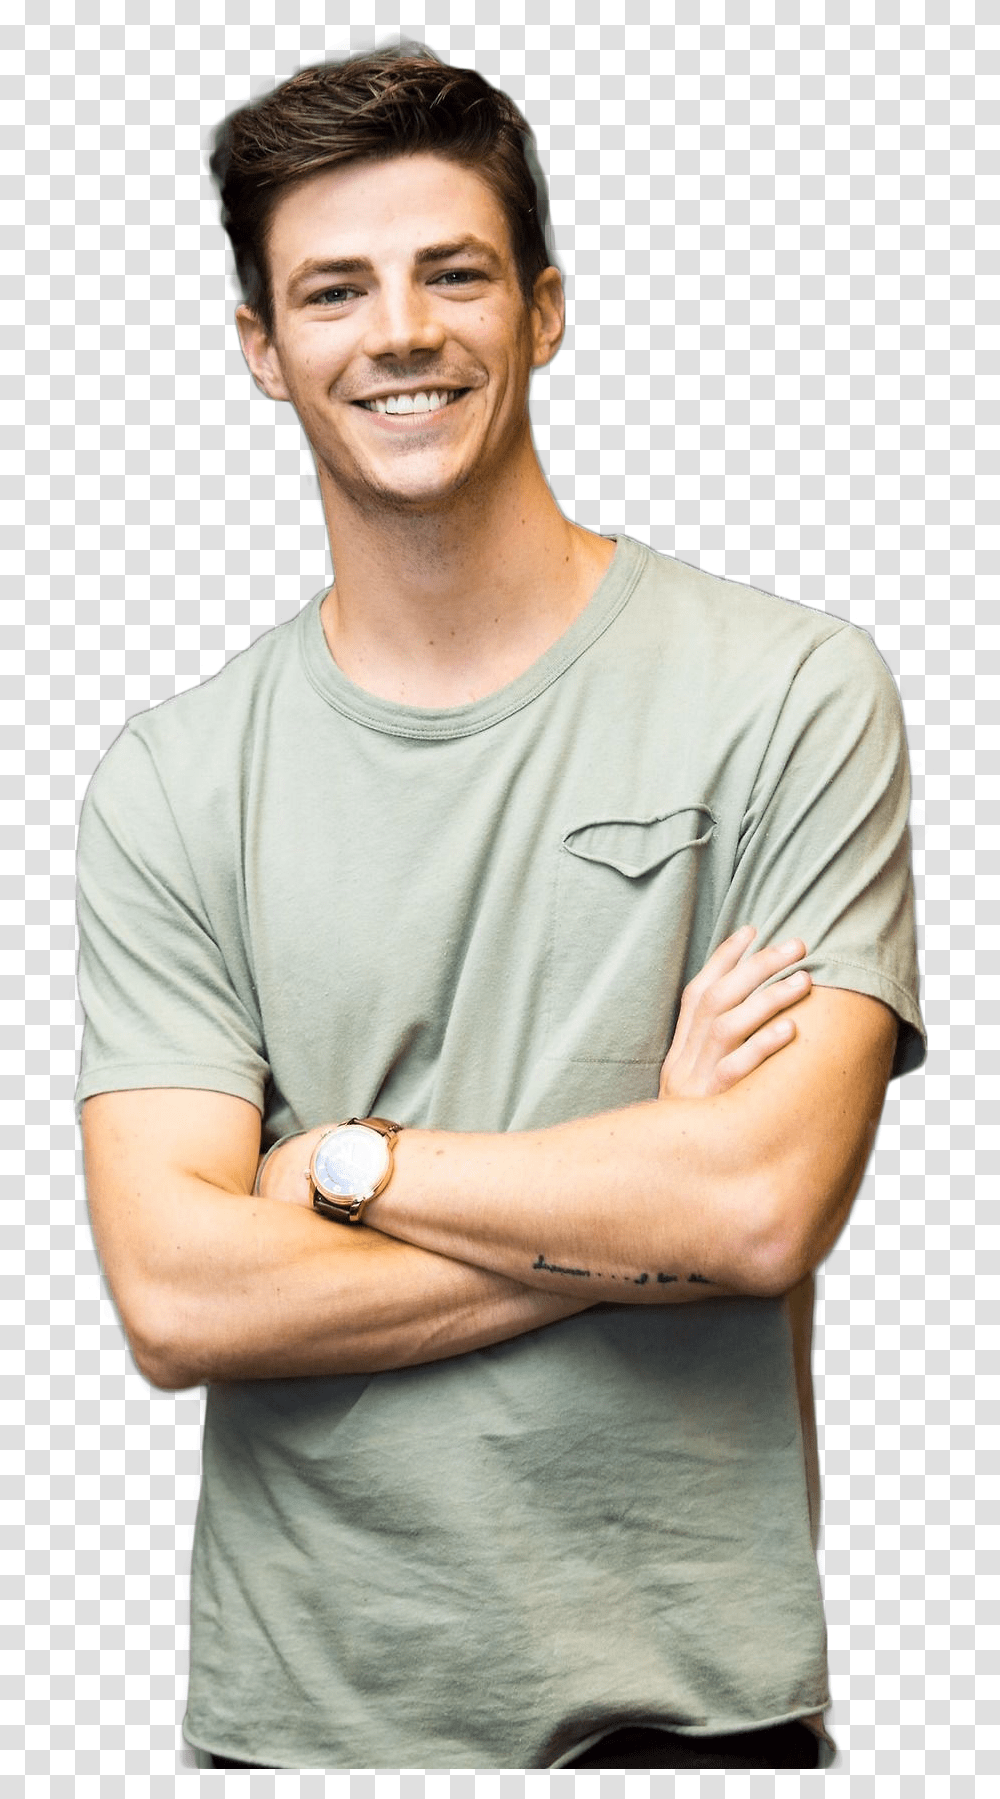 Grant Gustin Background Image Celebrities Grant Gustin Background, Person, Human, Arm, Clothing Transparent Png